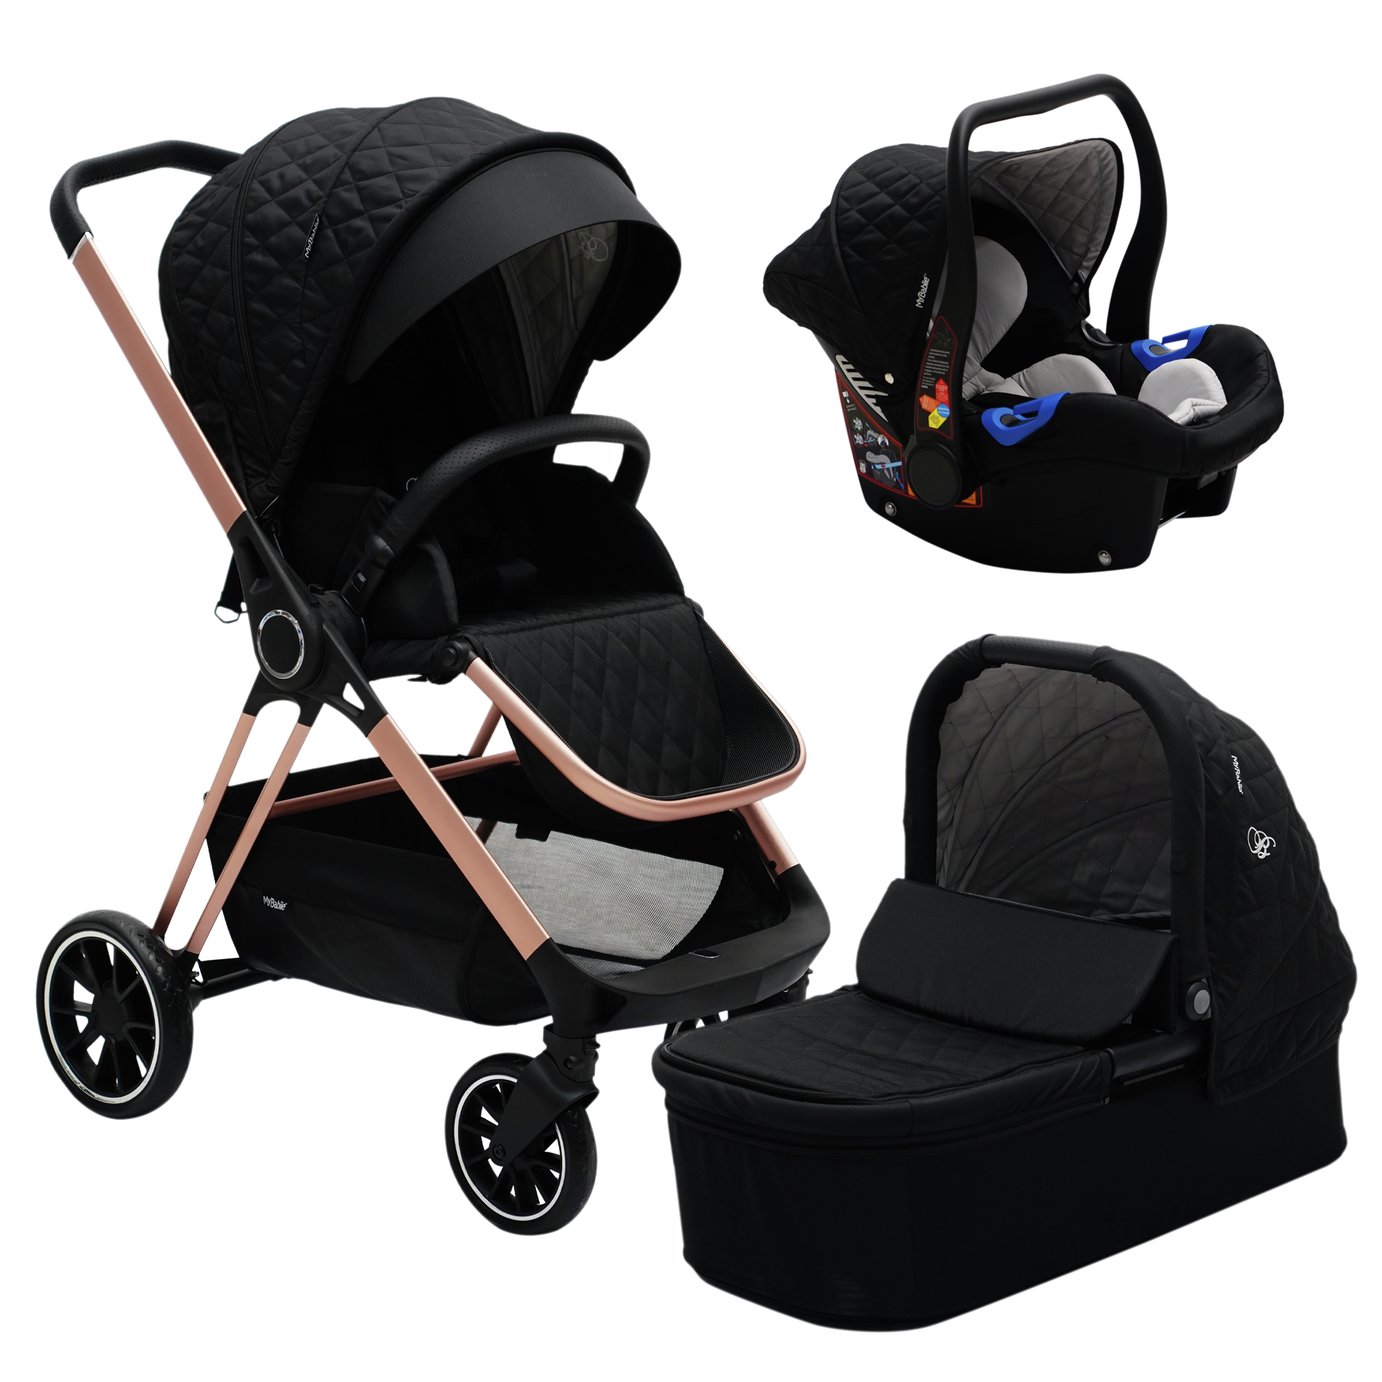 My Babiie MB250 Black Quilted Travel System